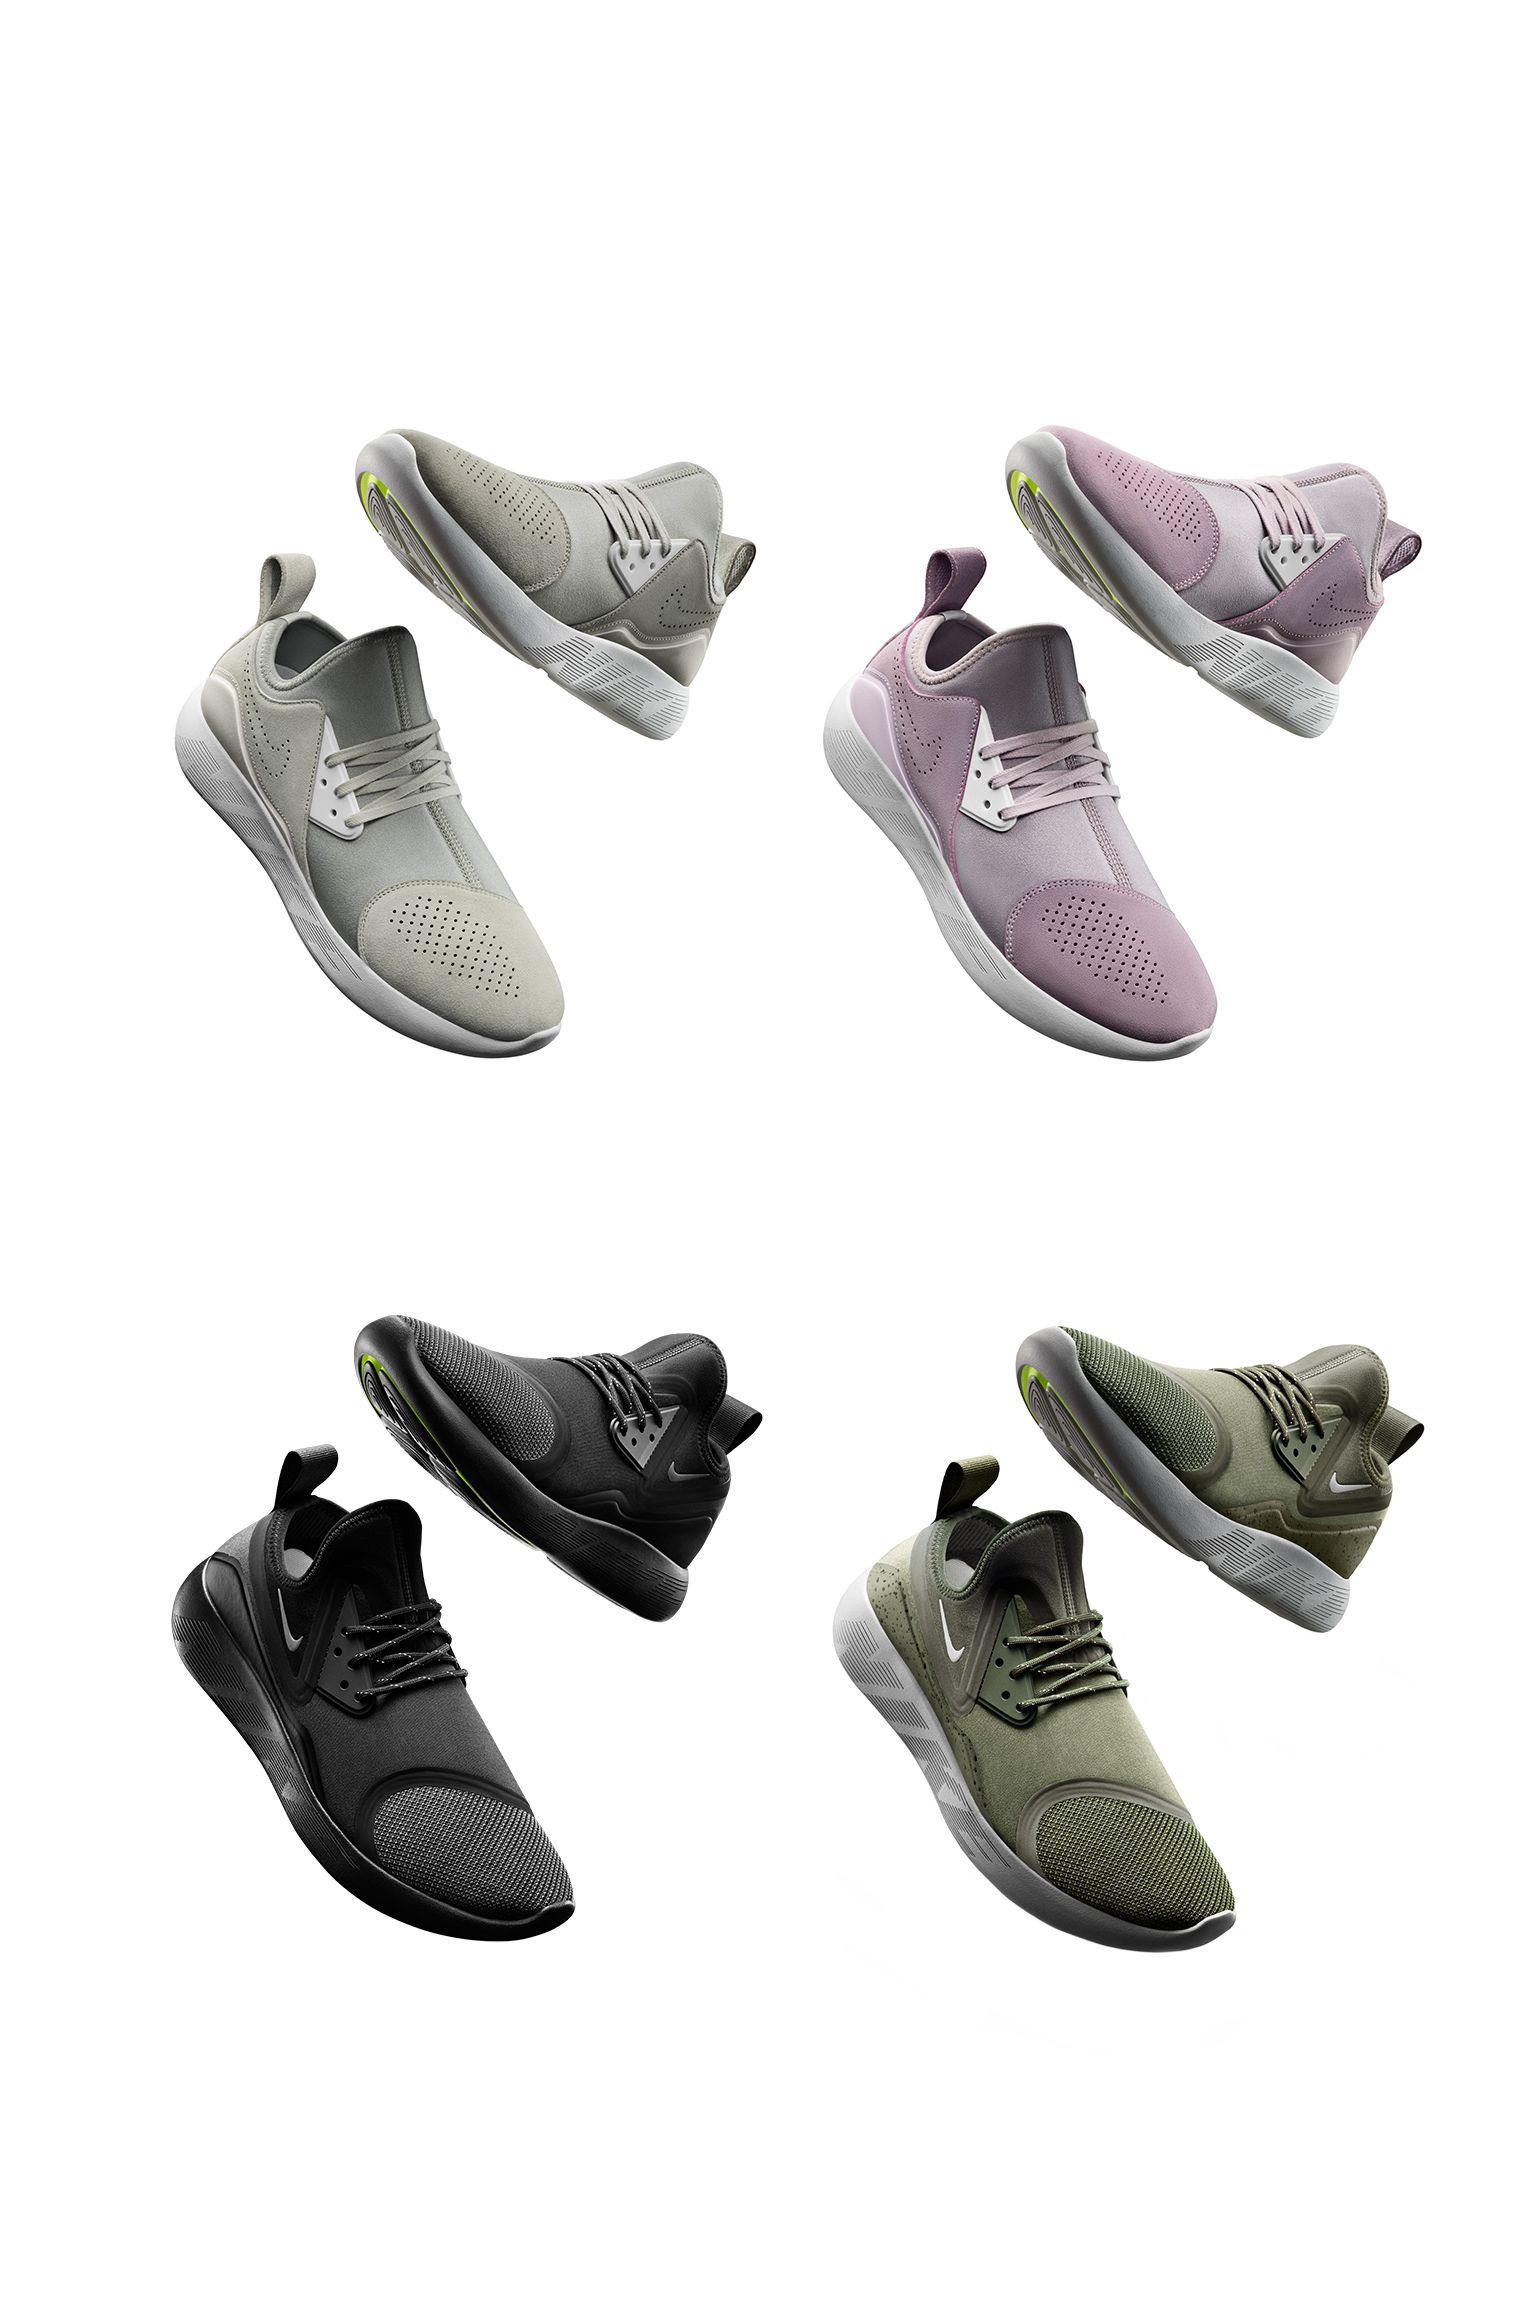 Nike LunarCharge Collection. Nike SNKRS